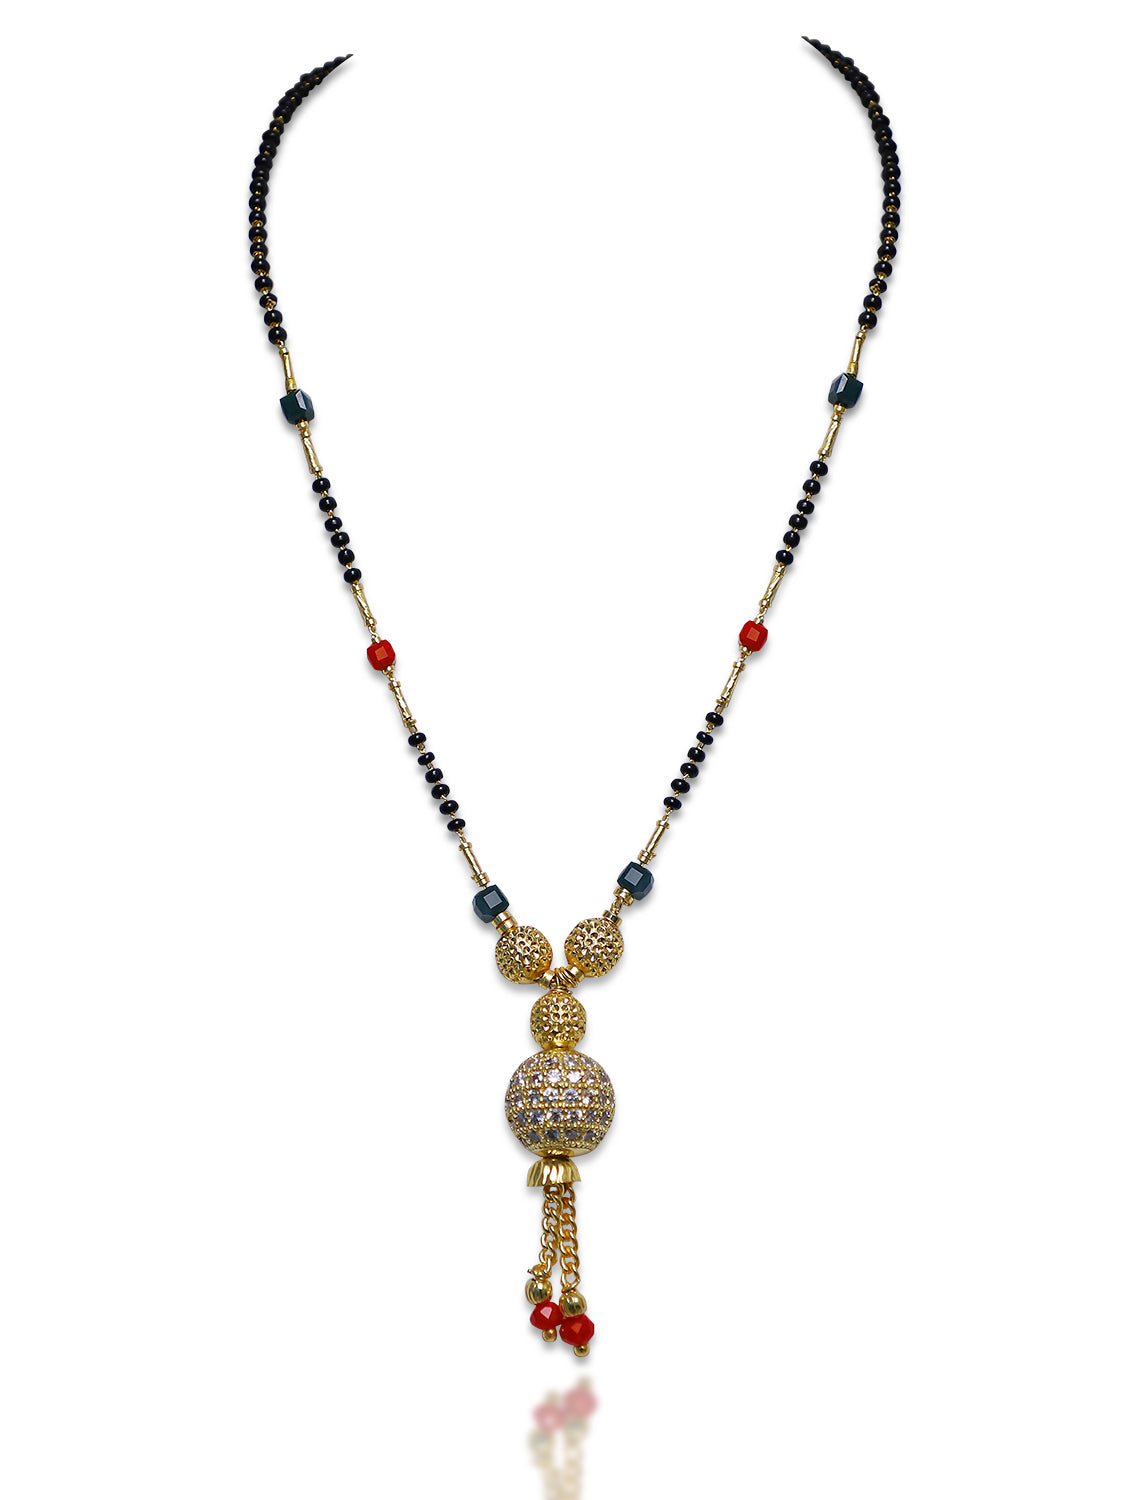 Short Mangalsutra Designs Gold Plated मंगळसूत्र Black Red Green Beads Latkan Pendant (20 Inches)